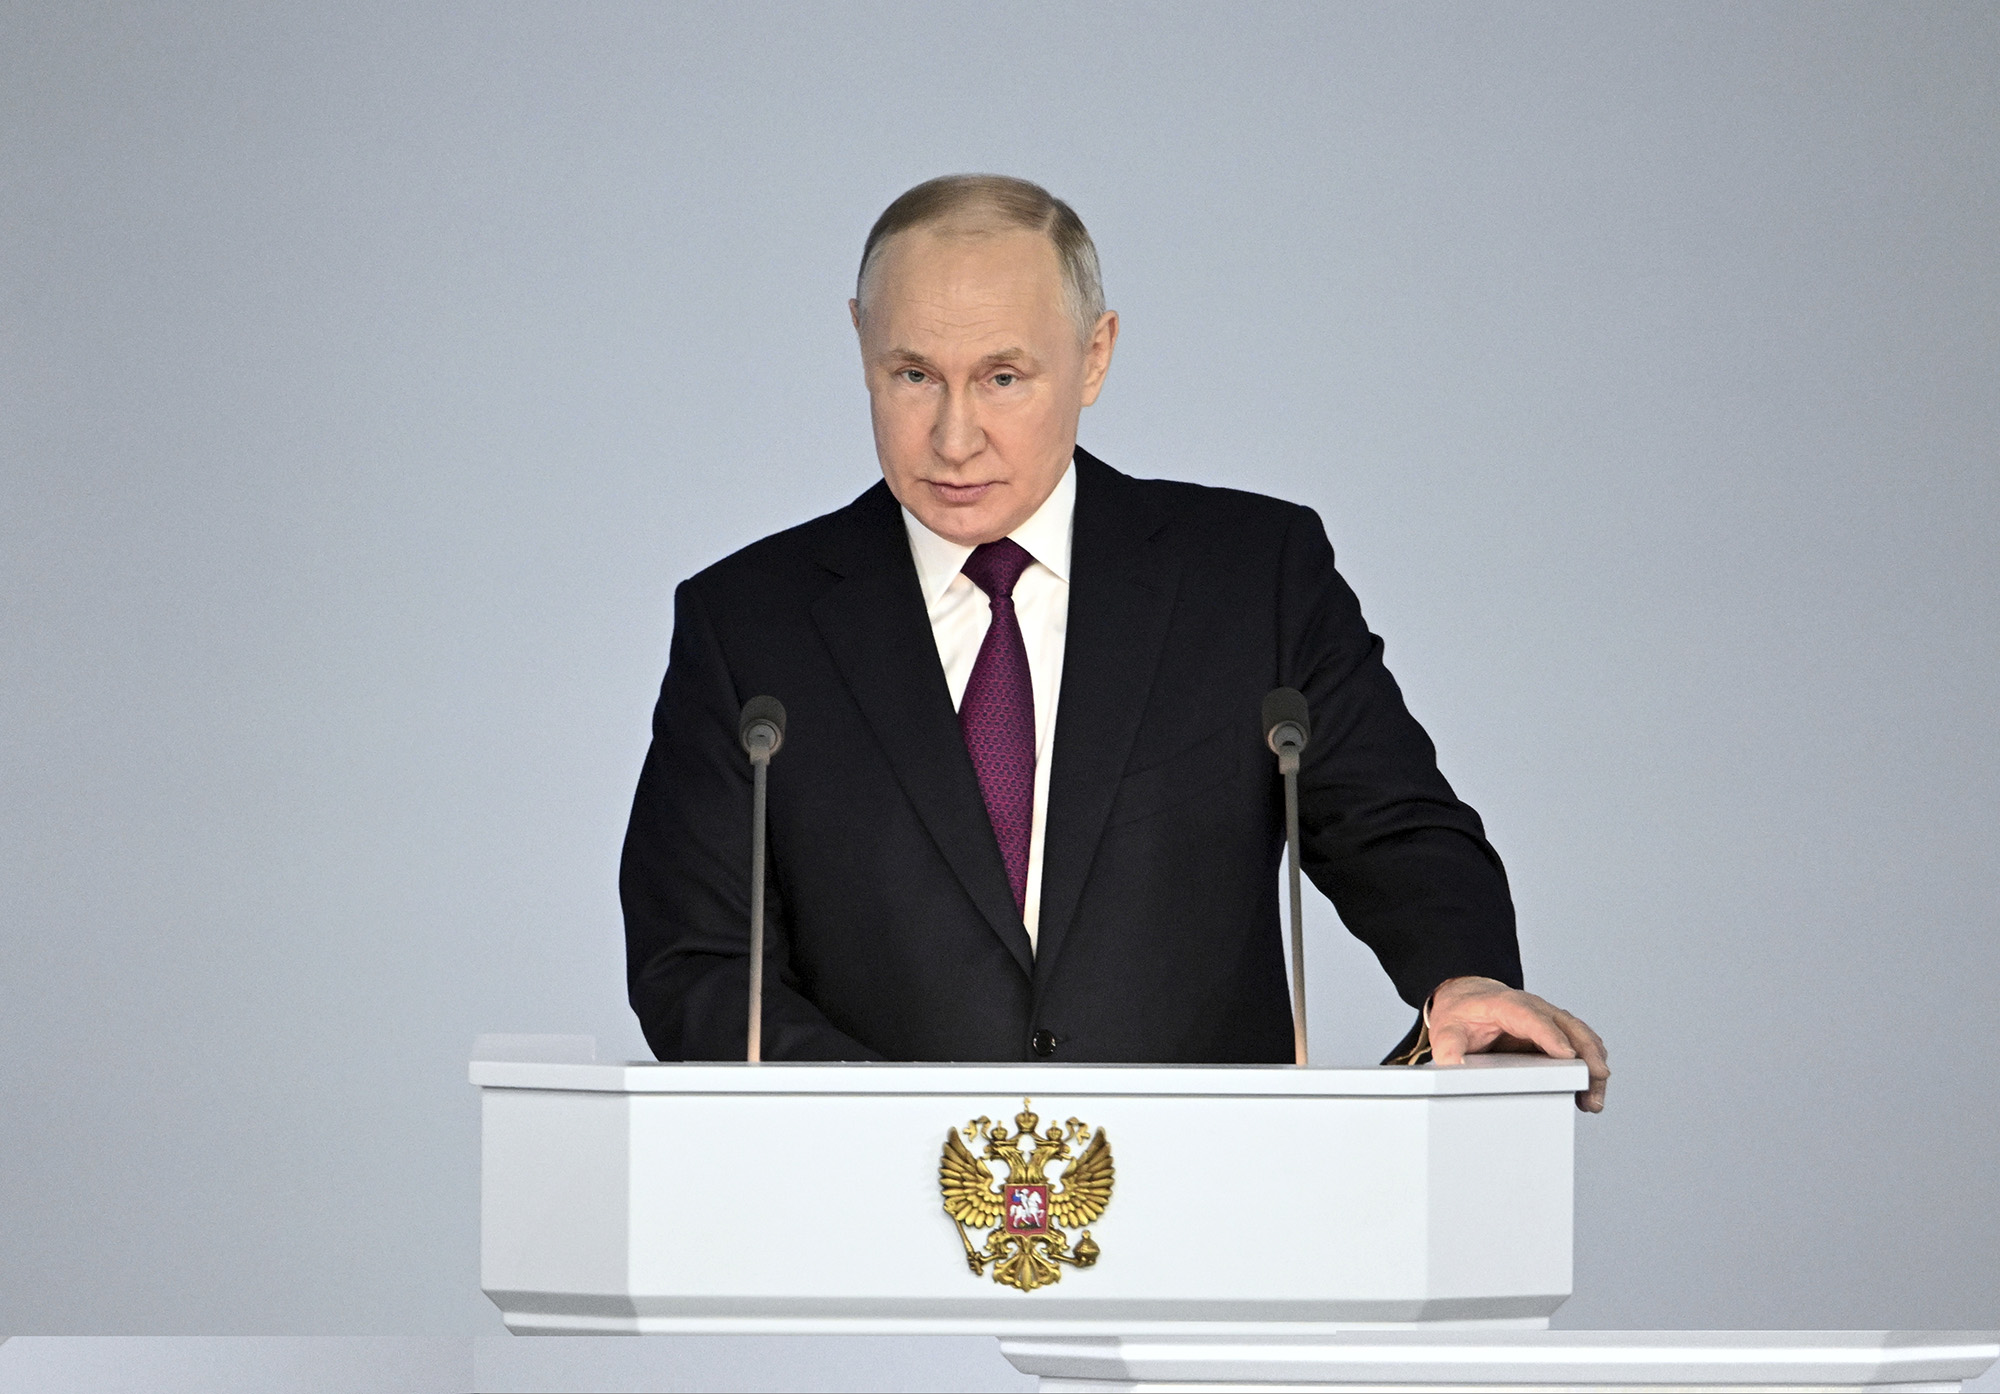 Russian President Vladimir Putin delivers his annual address to the Federal Assembly, including lawmakers of the State Duma, members of the Federation Council, regional governors and other officials, in Moscow, Russia, on February 20.